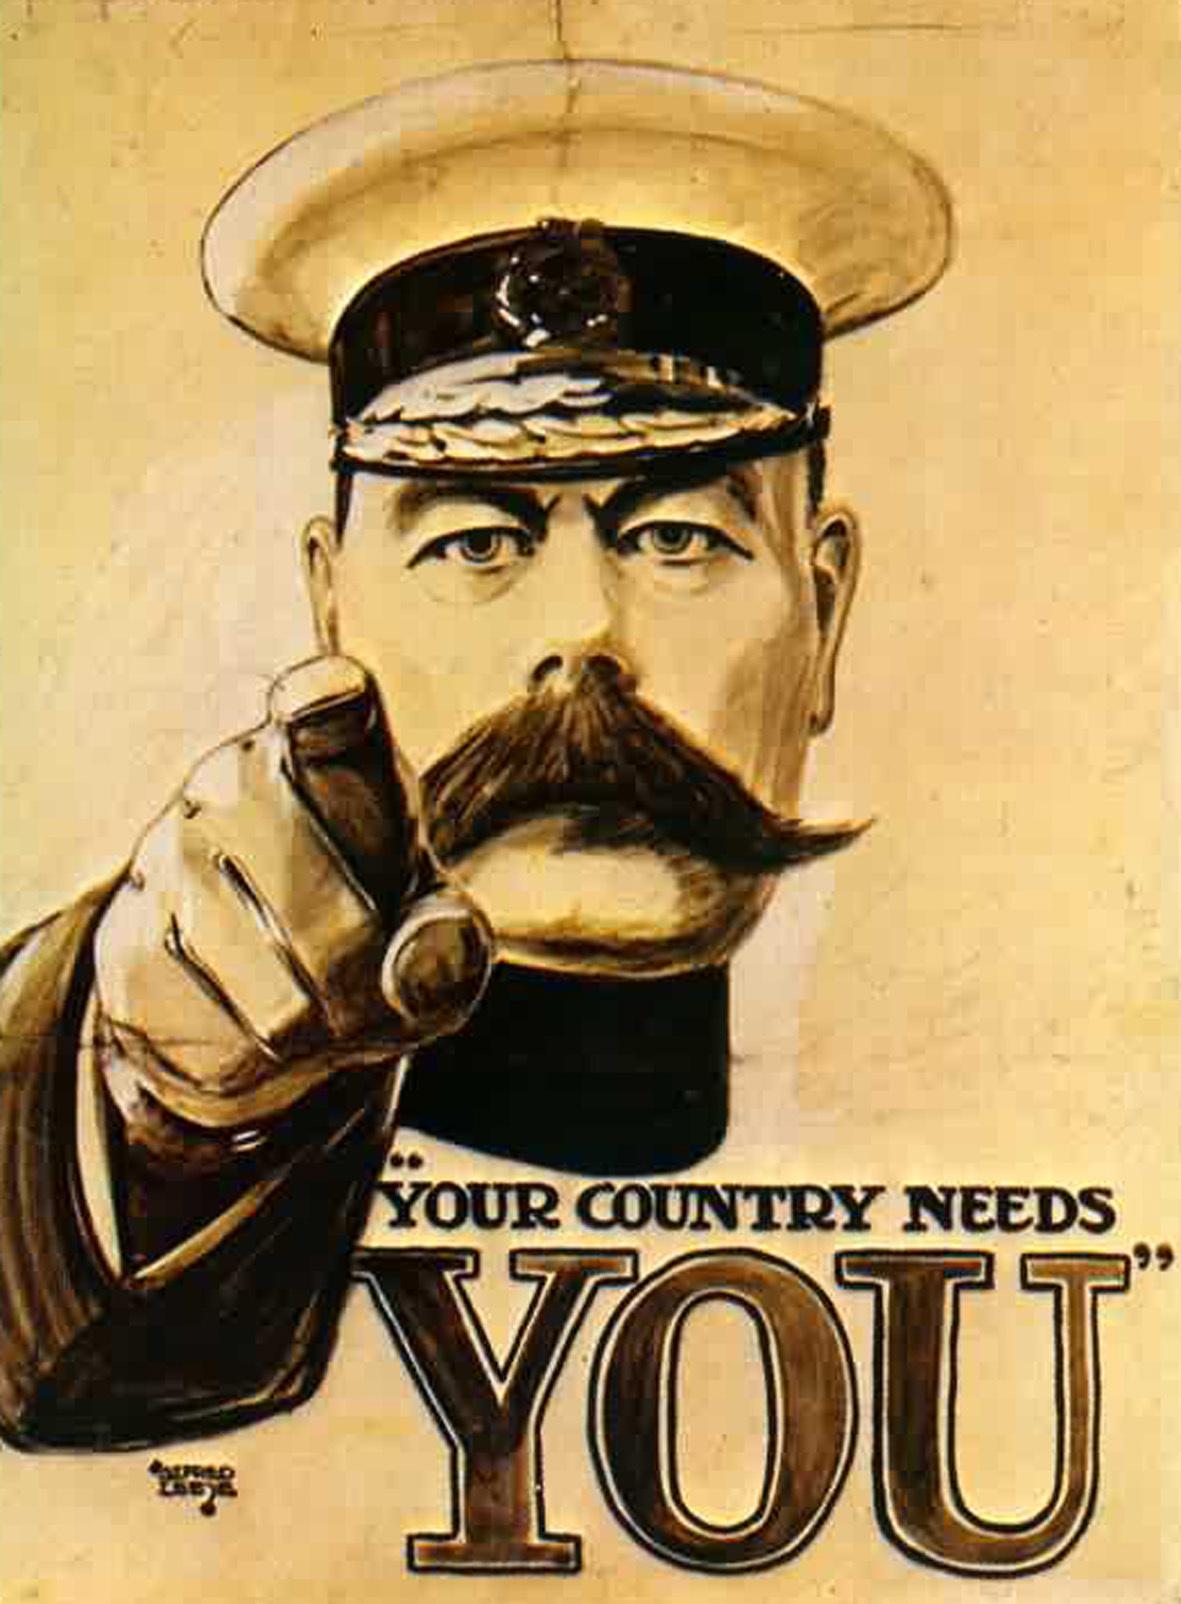 Lord Kitchener - "Your country needs you" WWI propaganda poster